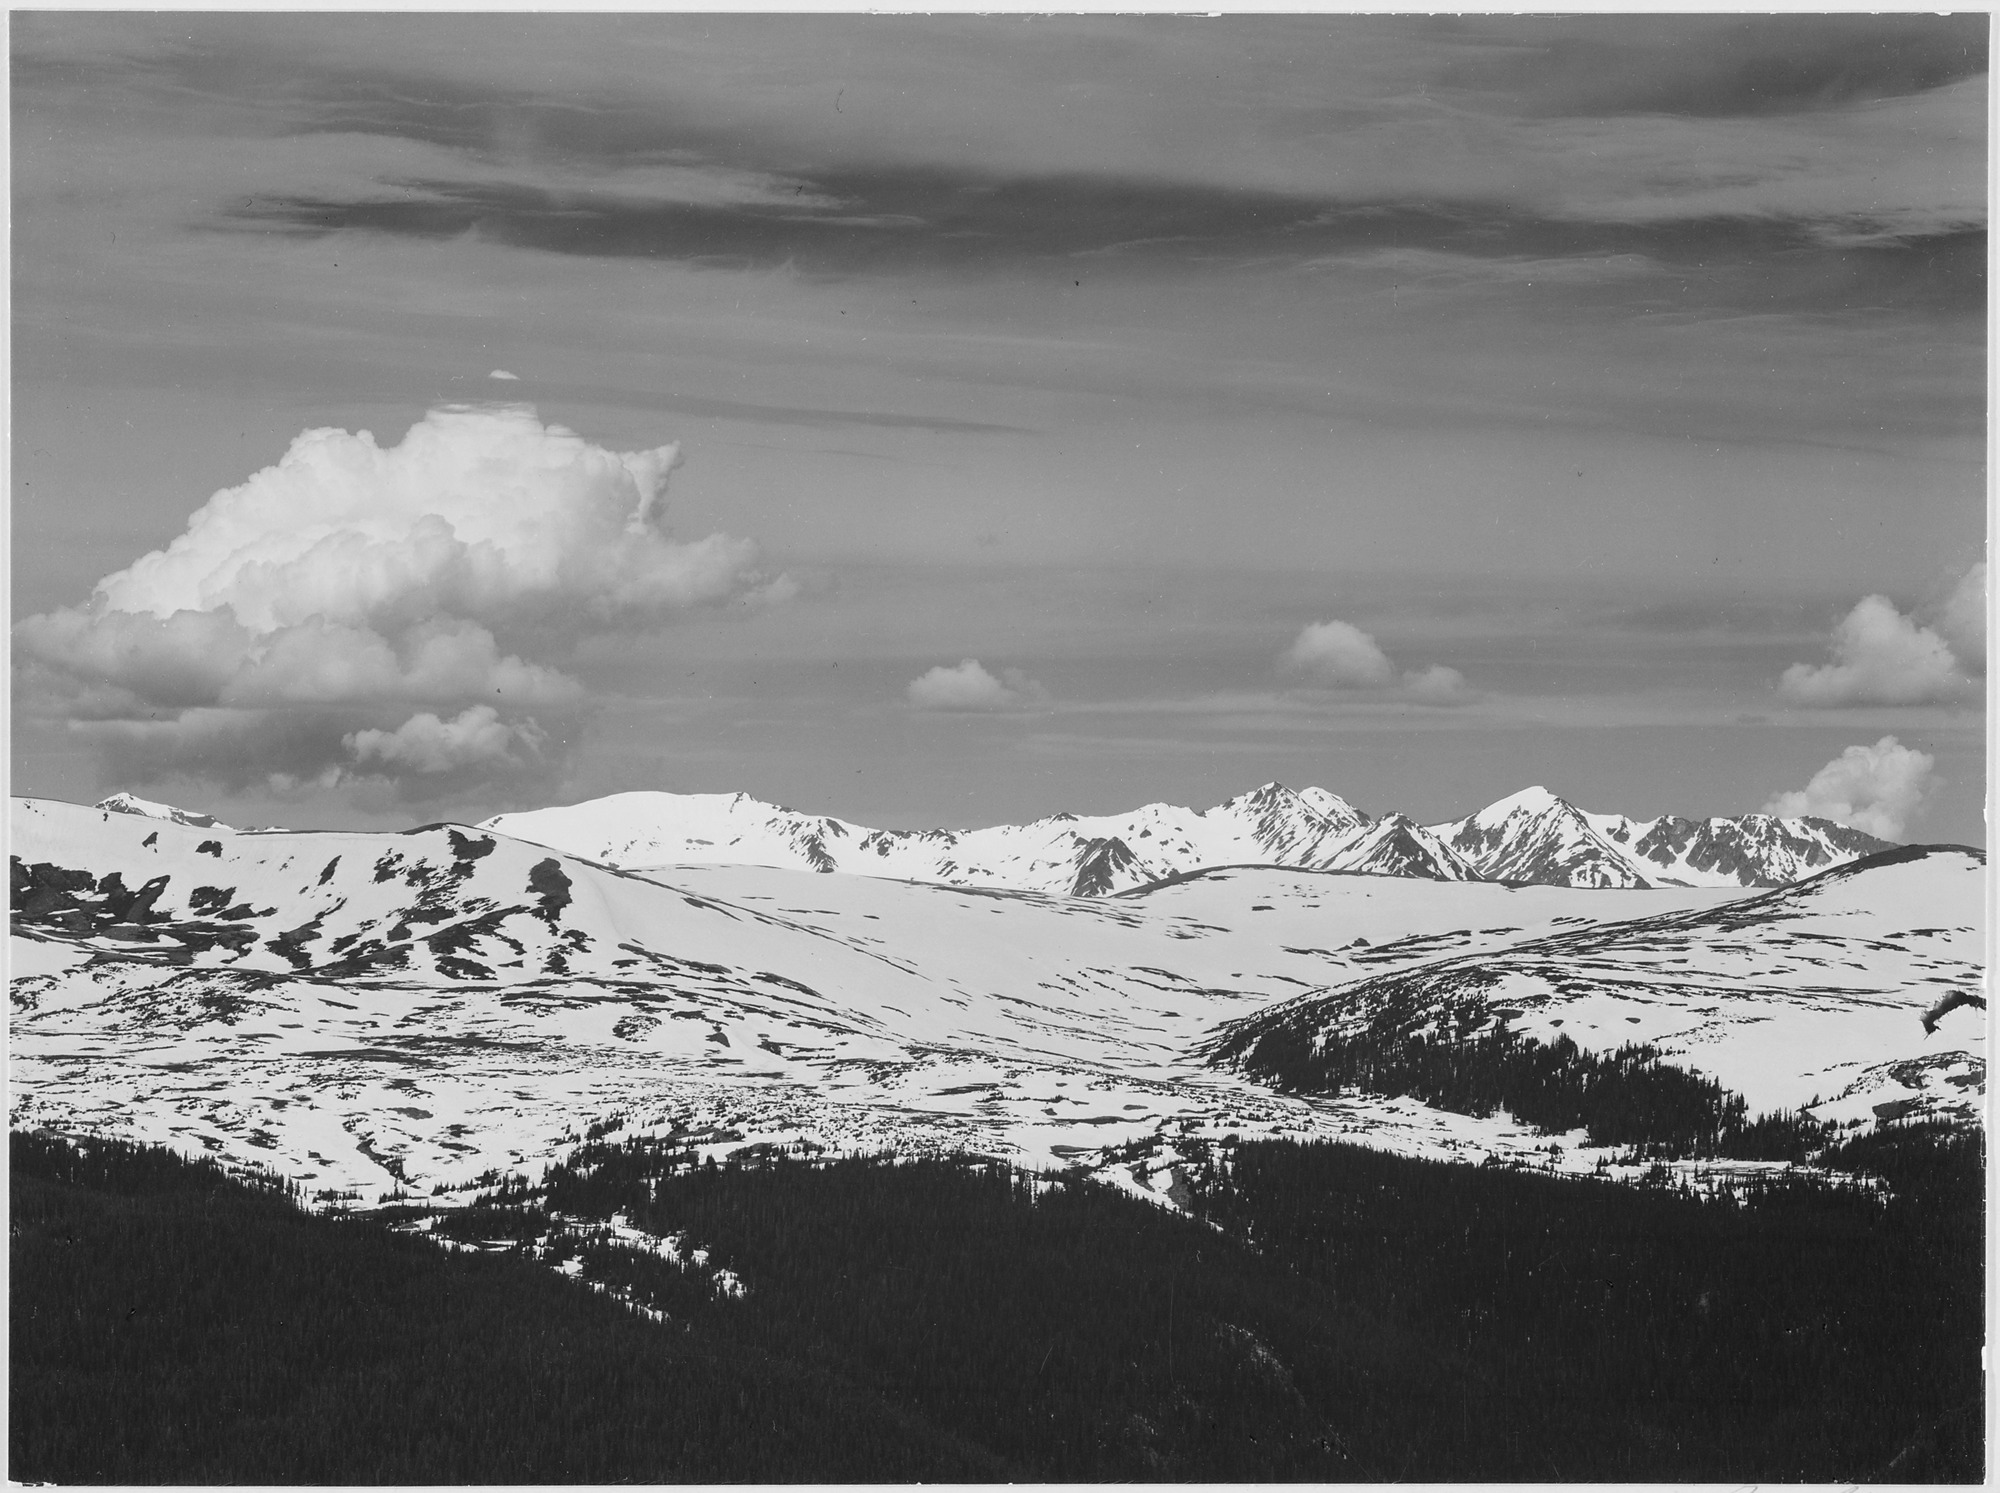 View at timberline, dark foreground, light snow capped mountain, gray sky, 